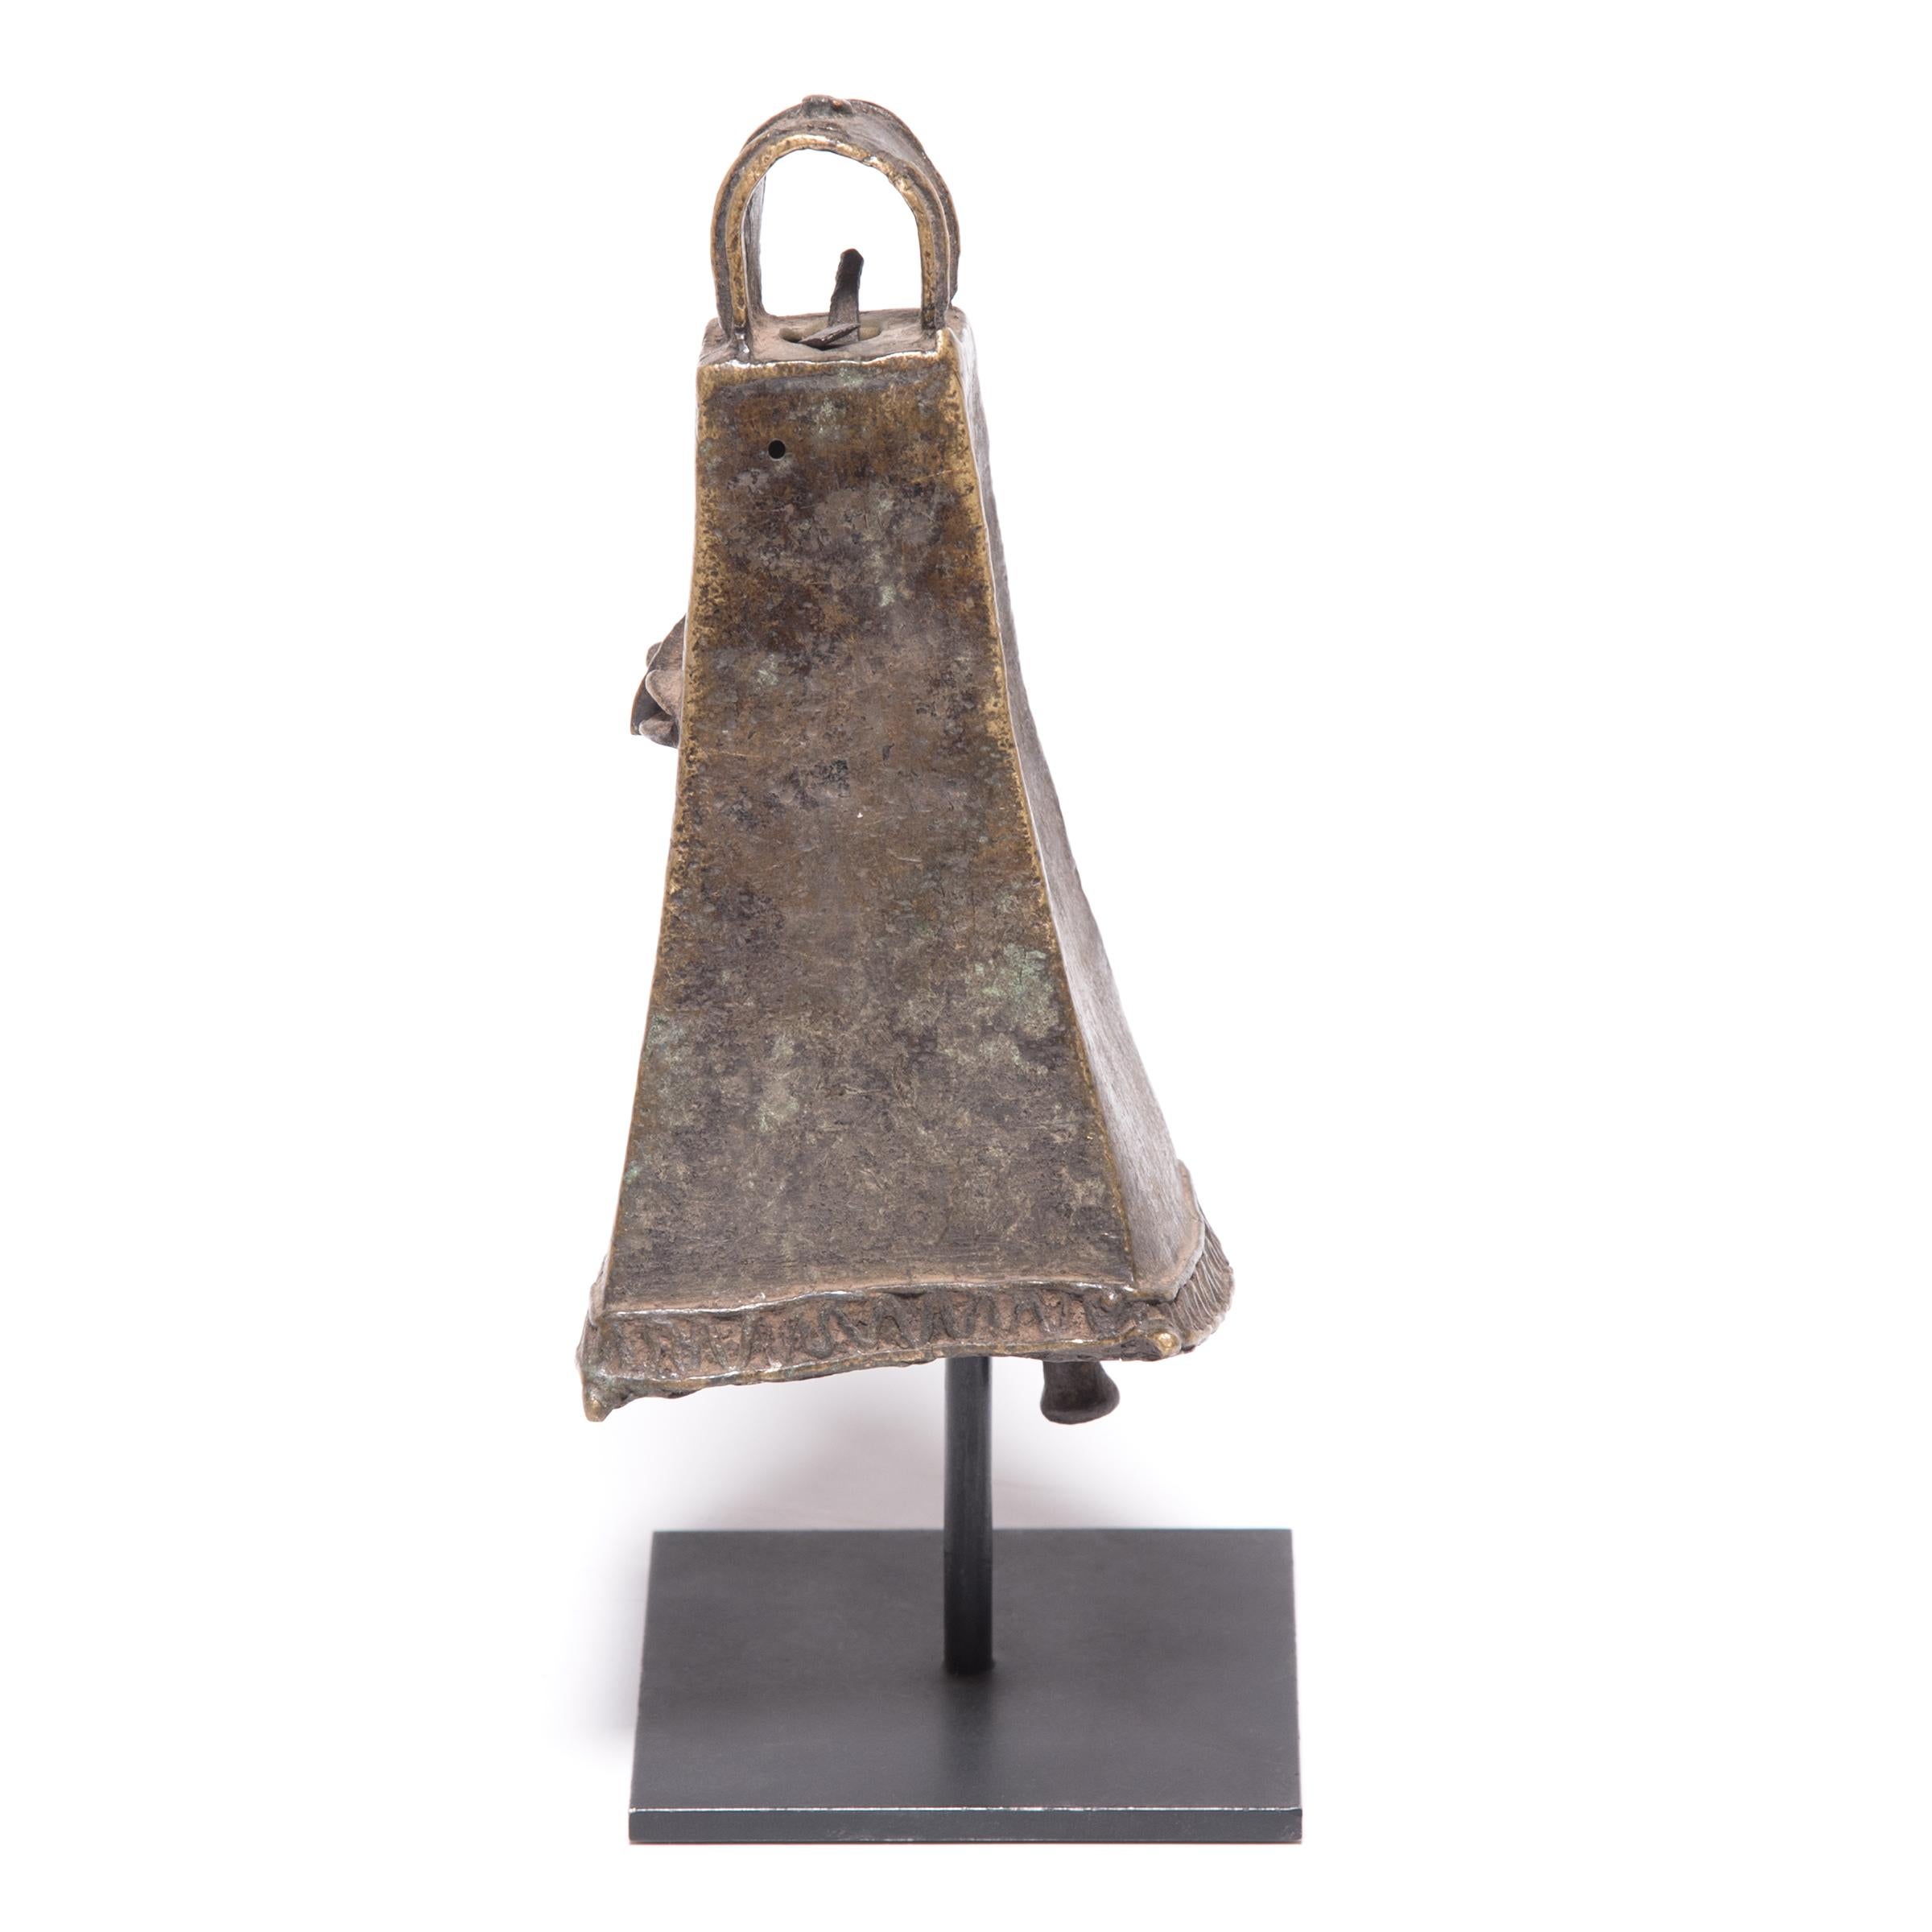 This four-sided brass face bell, known as omo, was created by an artisan of the Ijebu Yoruba people of Southern Nigeria. A mark of the wearer's rank and power, the bell would have been displayed by a prominent chief, worn at the left hip by a long